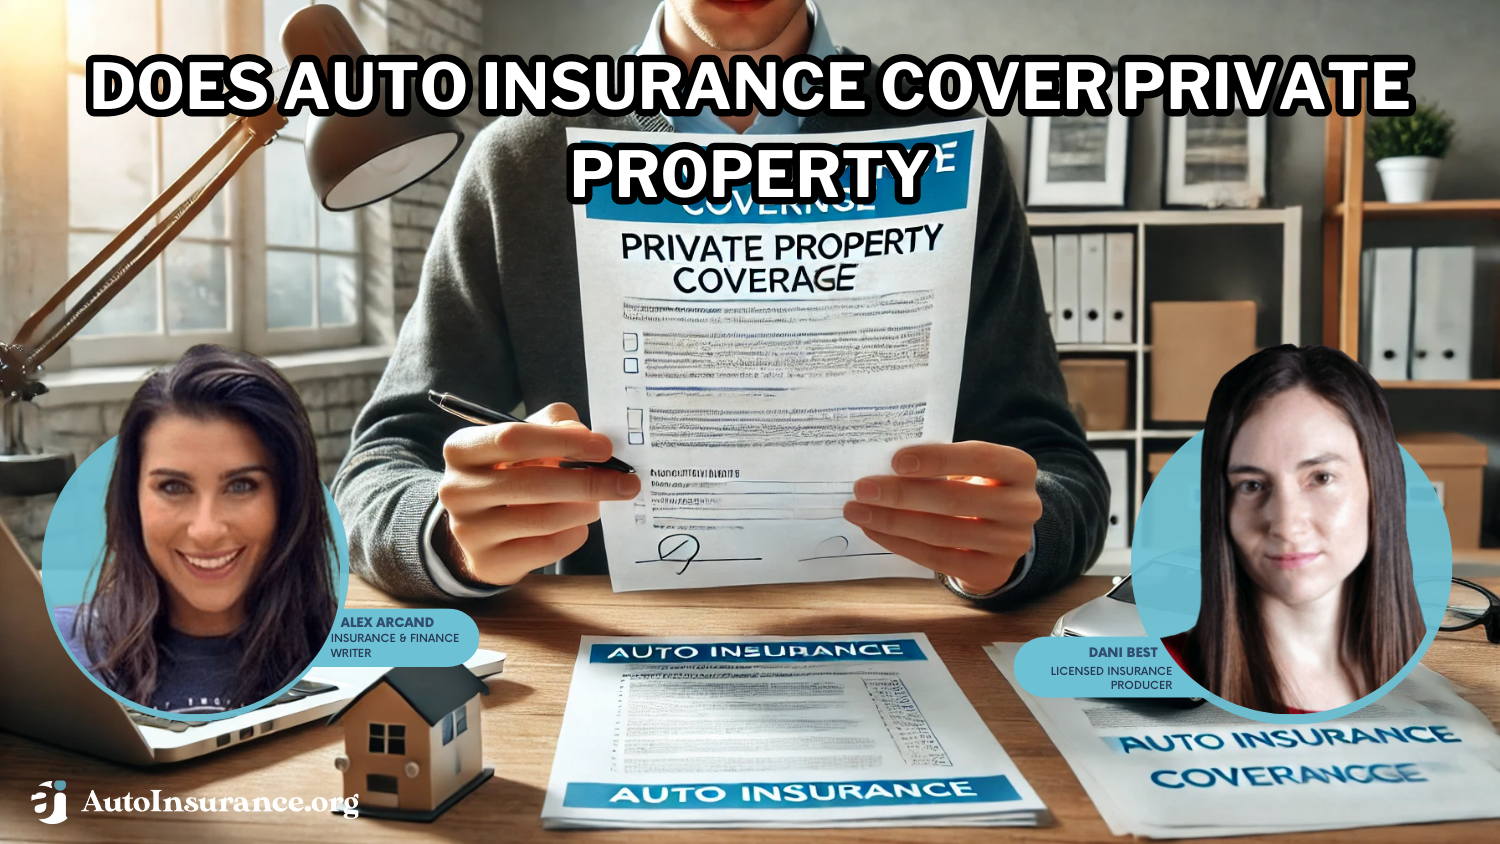 Does auto insurance cover private property?